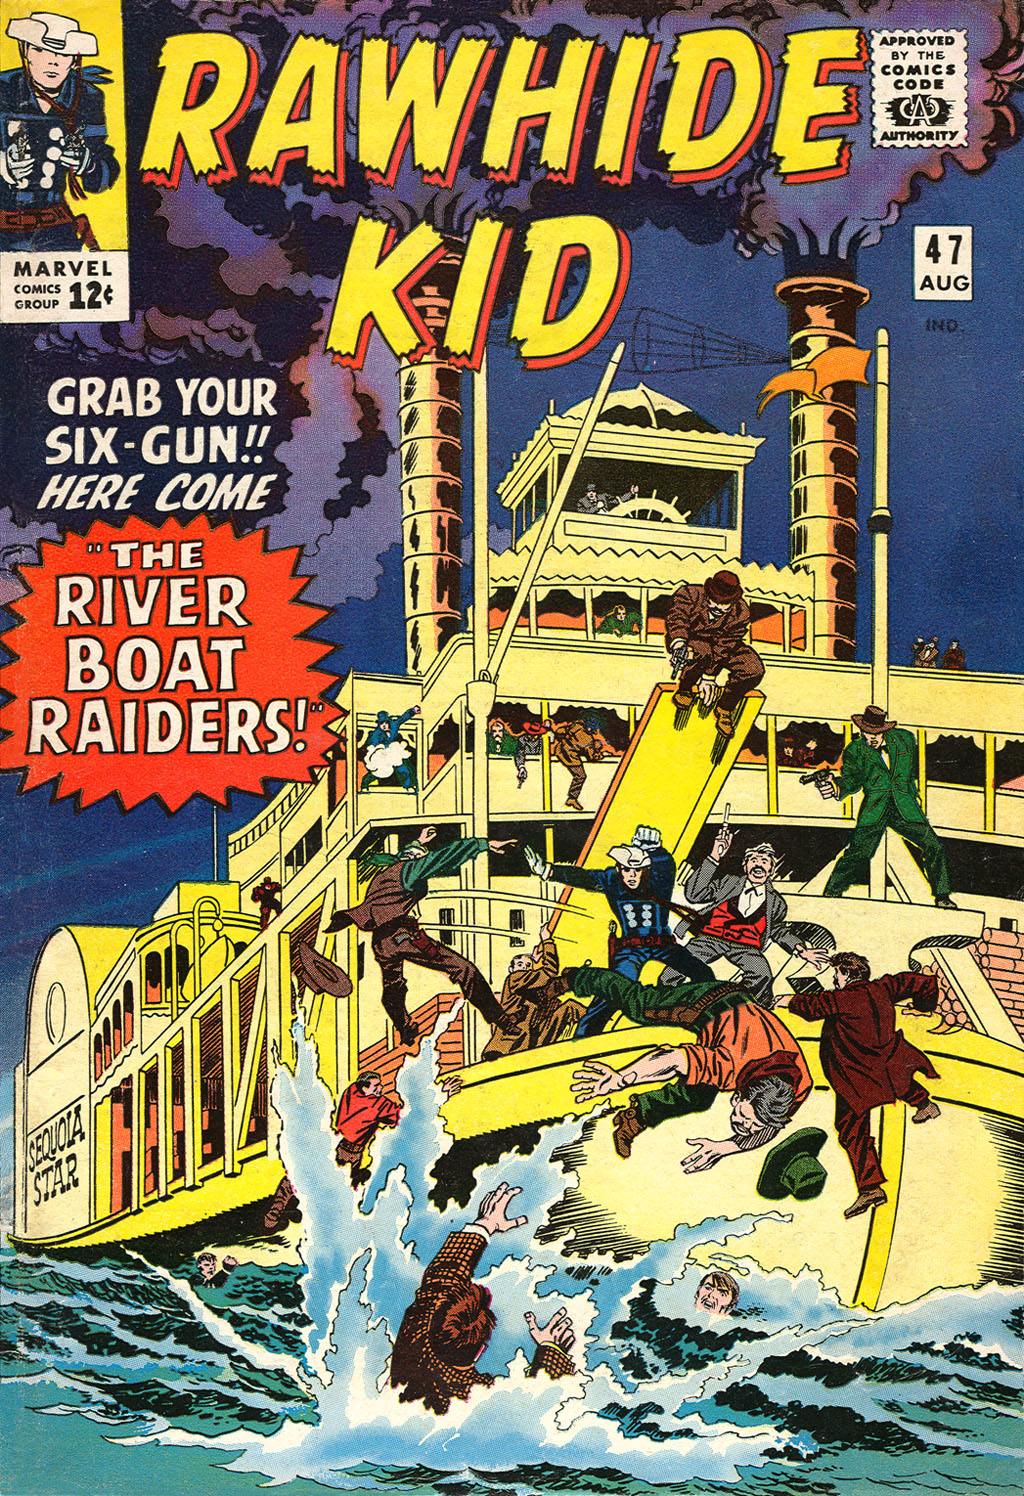 Read online The Rawhide Kid comic -  Issue #47 - 1